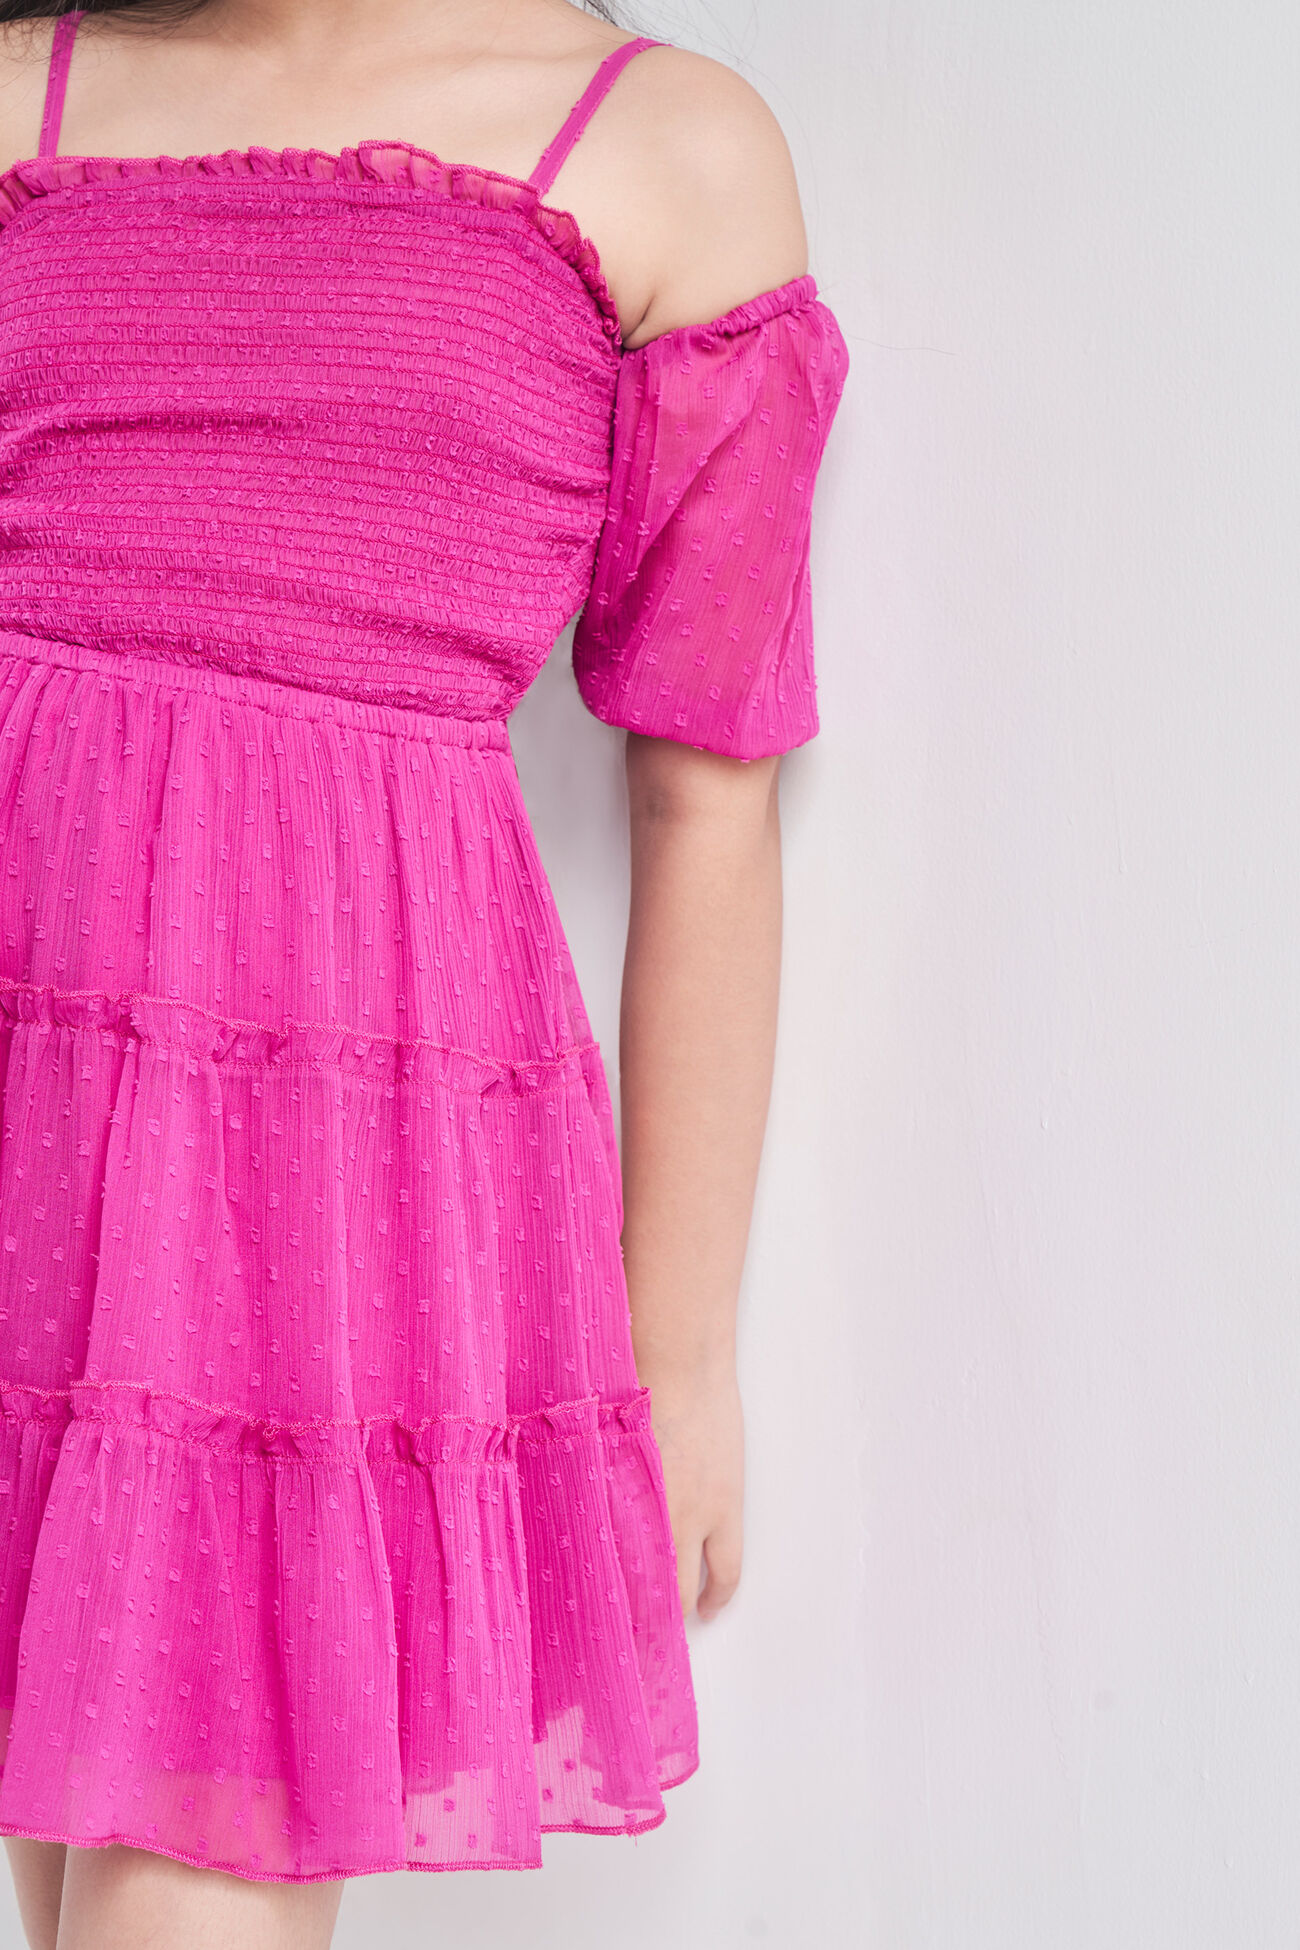 Pink Solid Straight Dress, Pink, image 6